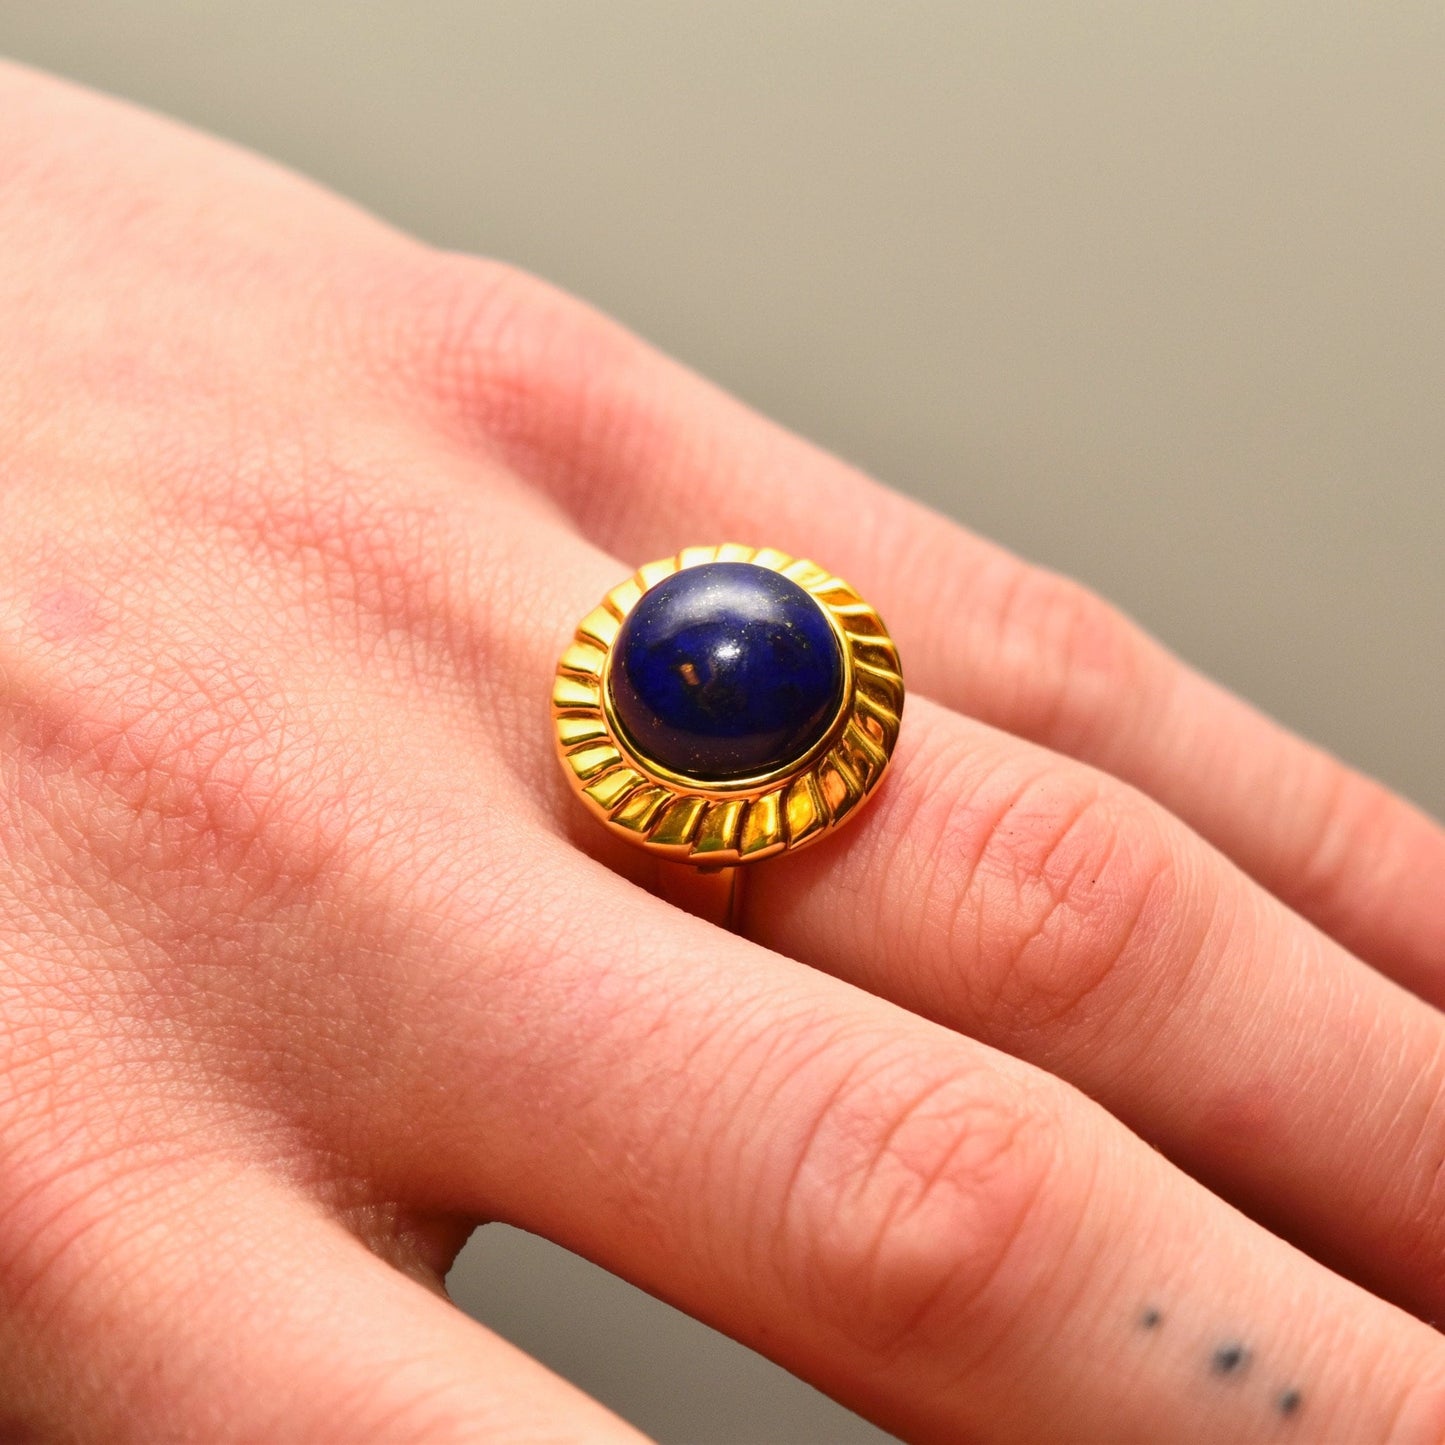 14K yellow gold cocktail ring with a round cobalt blue lapis lazuli cabochon gemstone solitaire, worn on a finger, size 7 1/2 US.